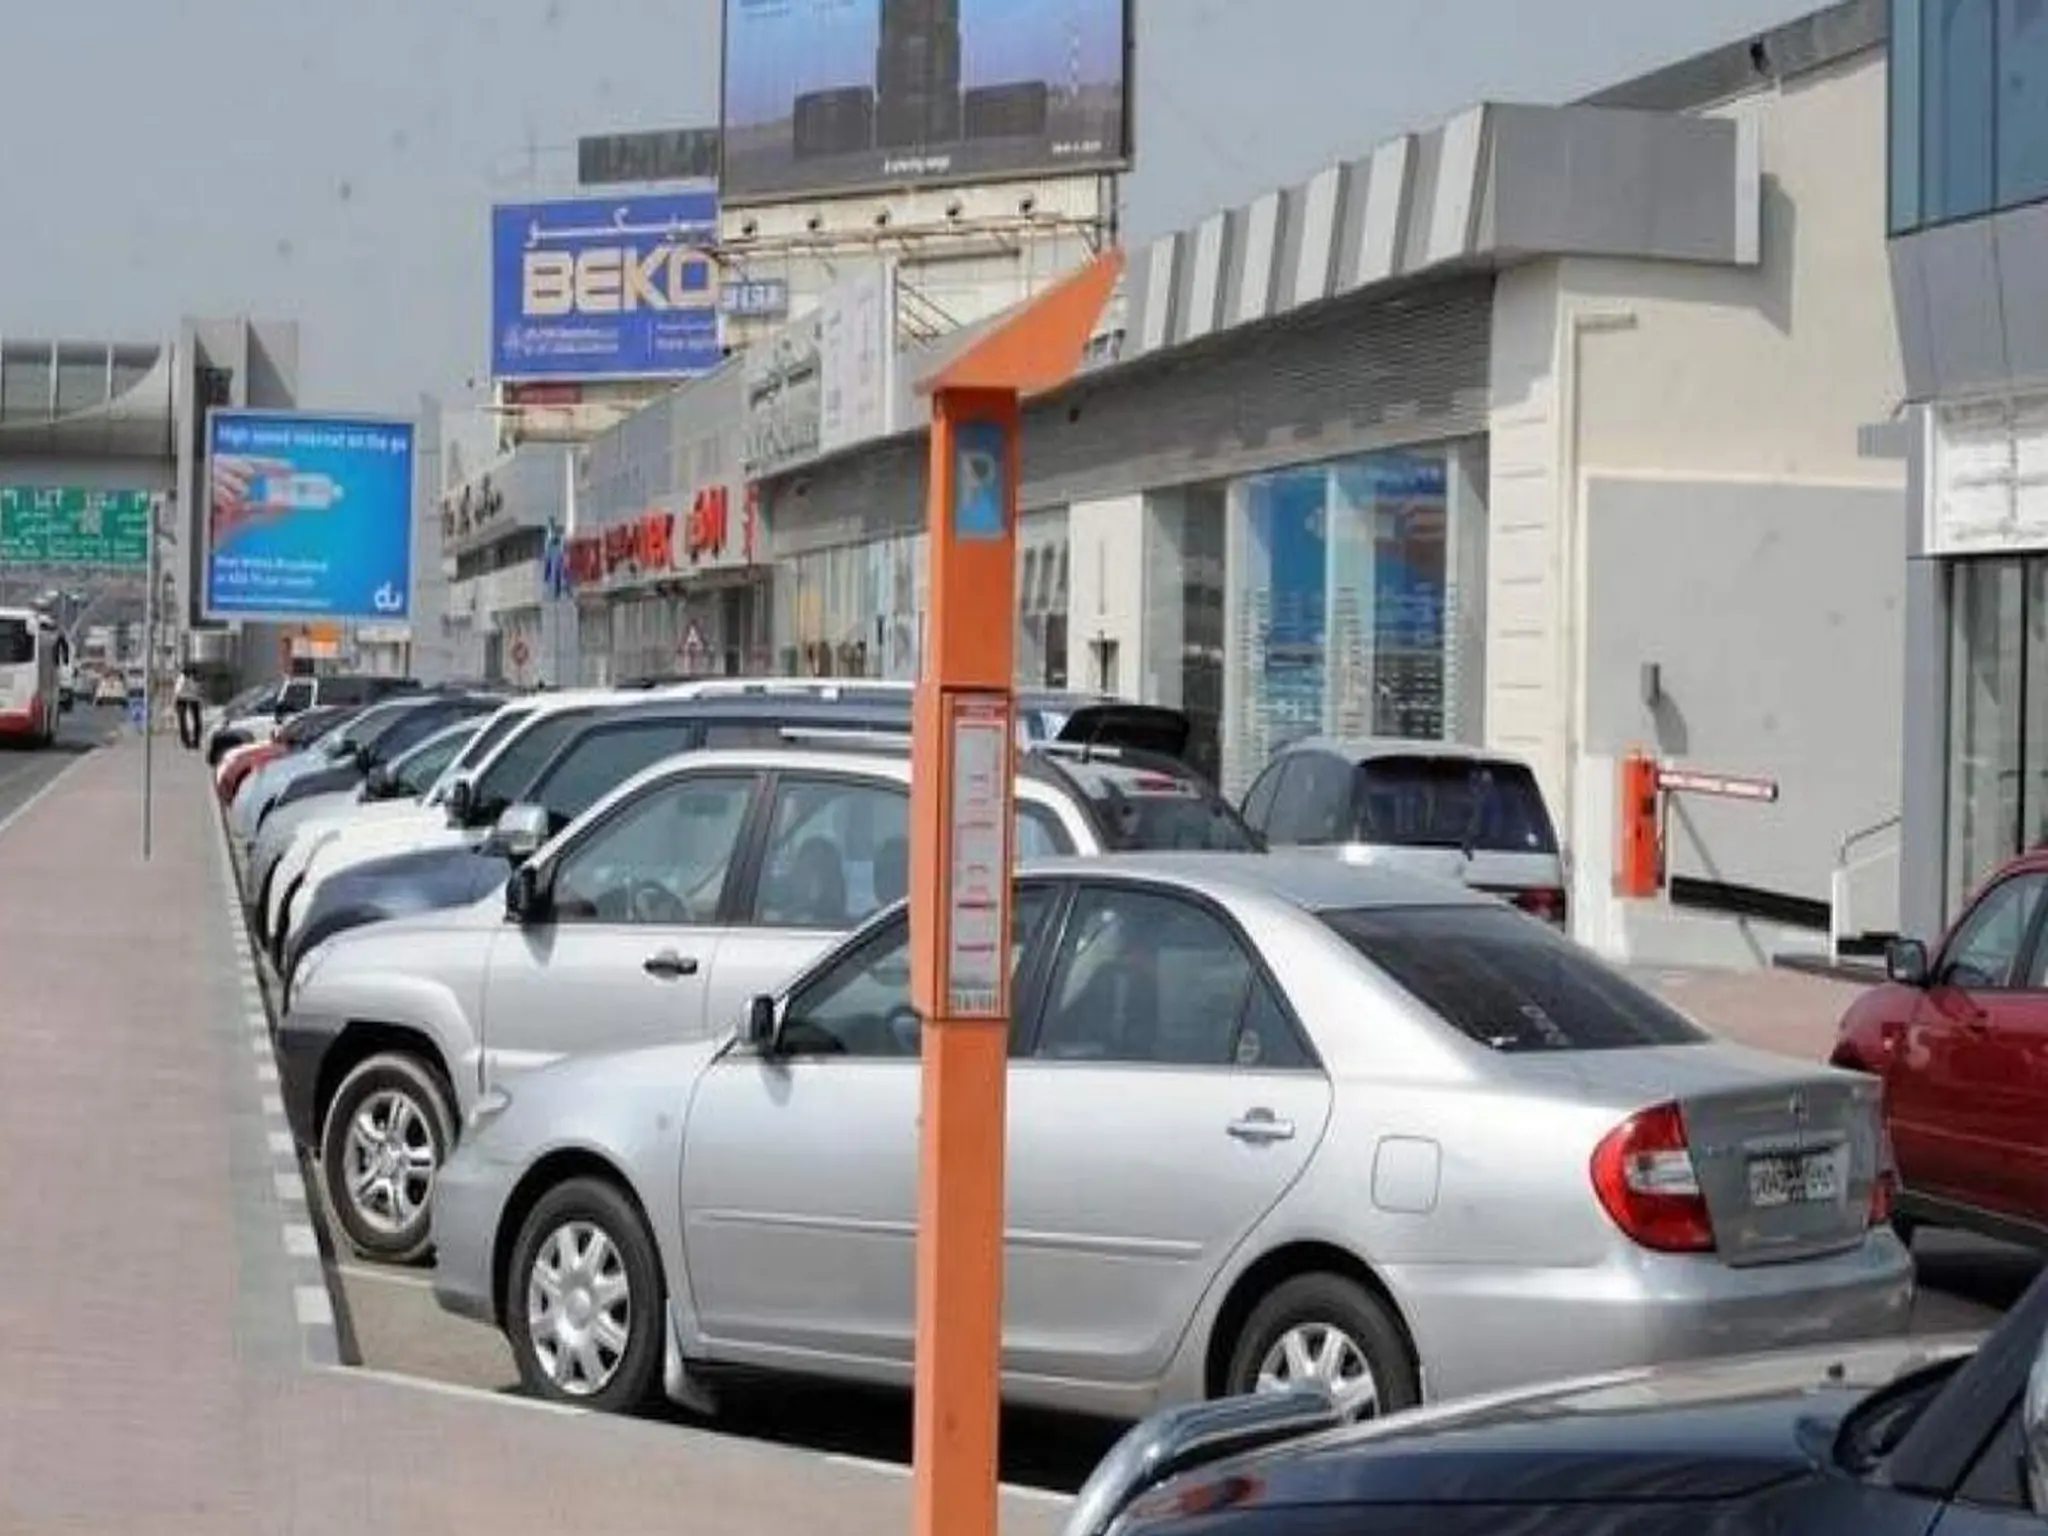 Dubai provides free parking for some cars and specifies the steps for submitting the application